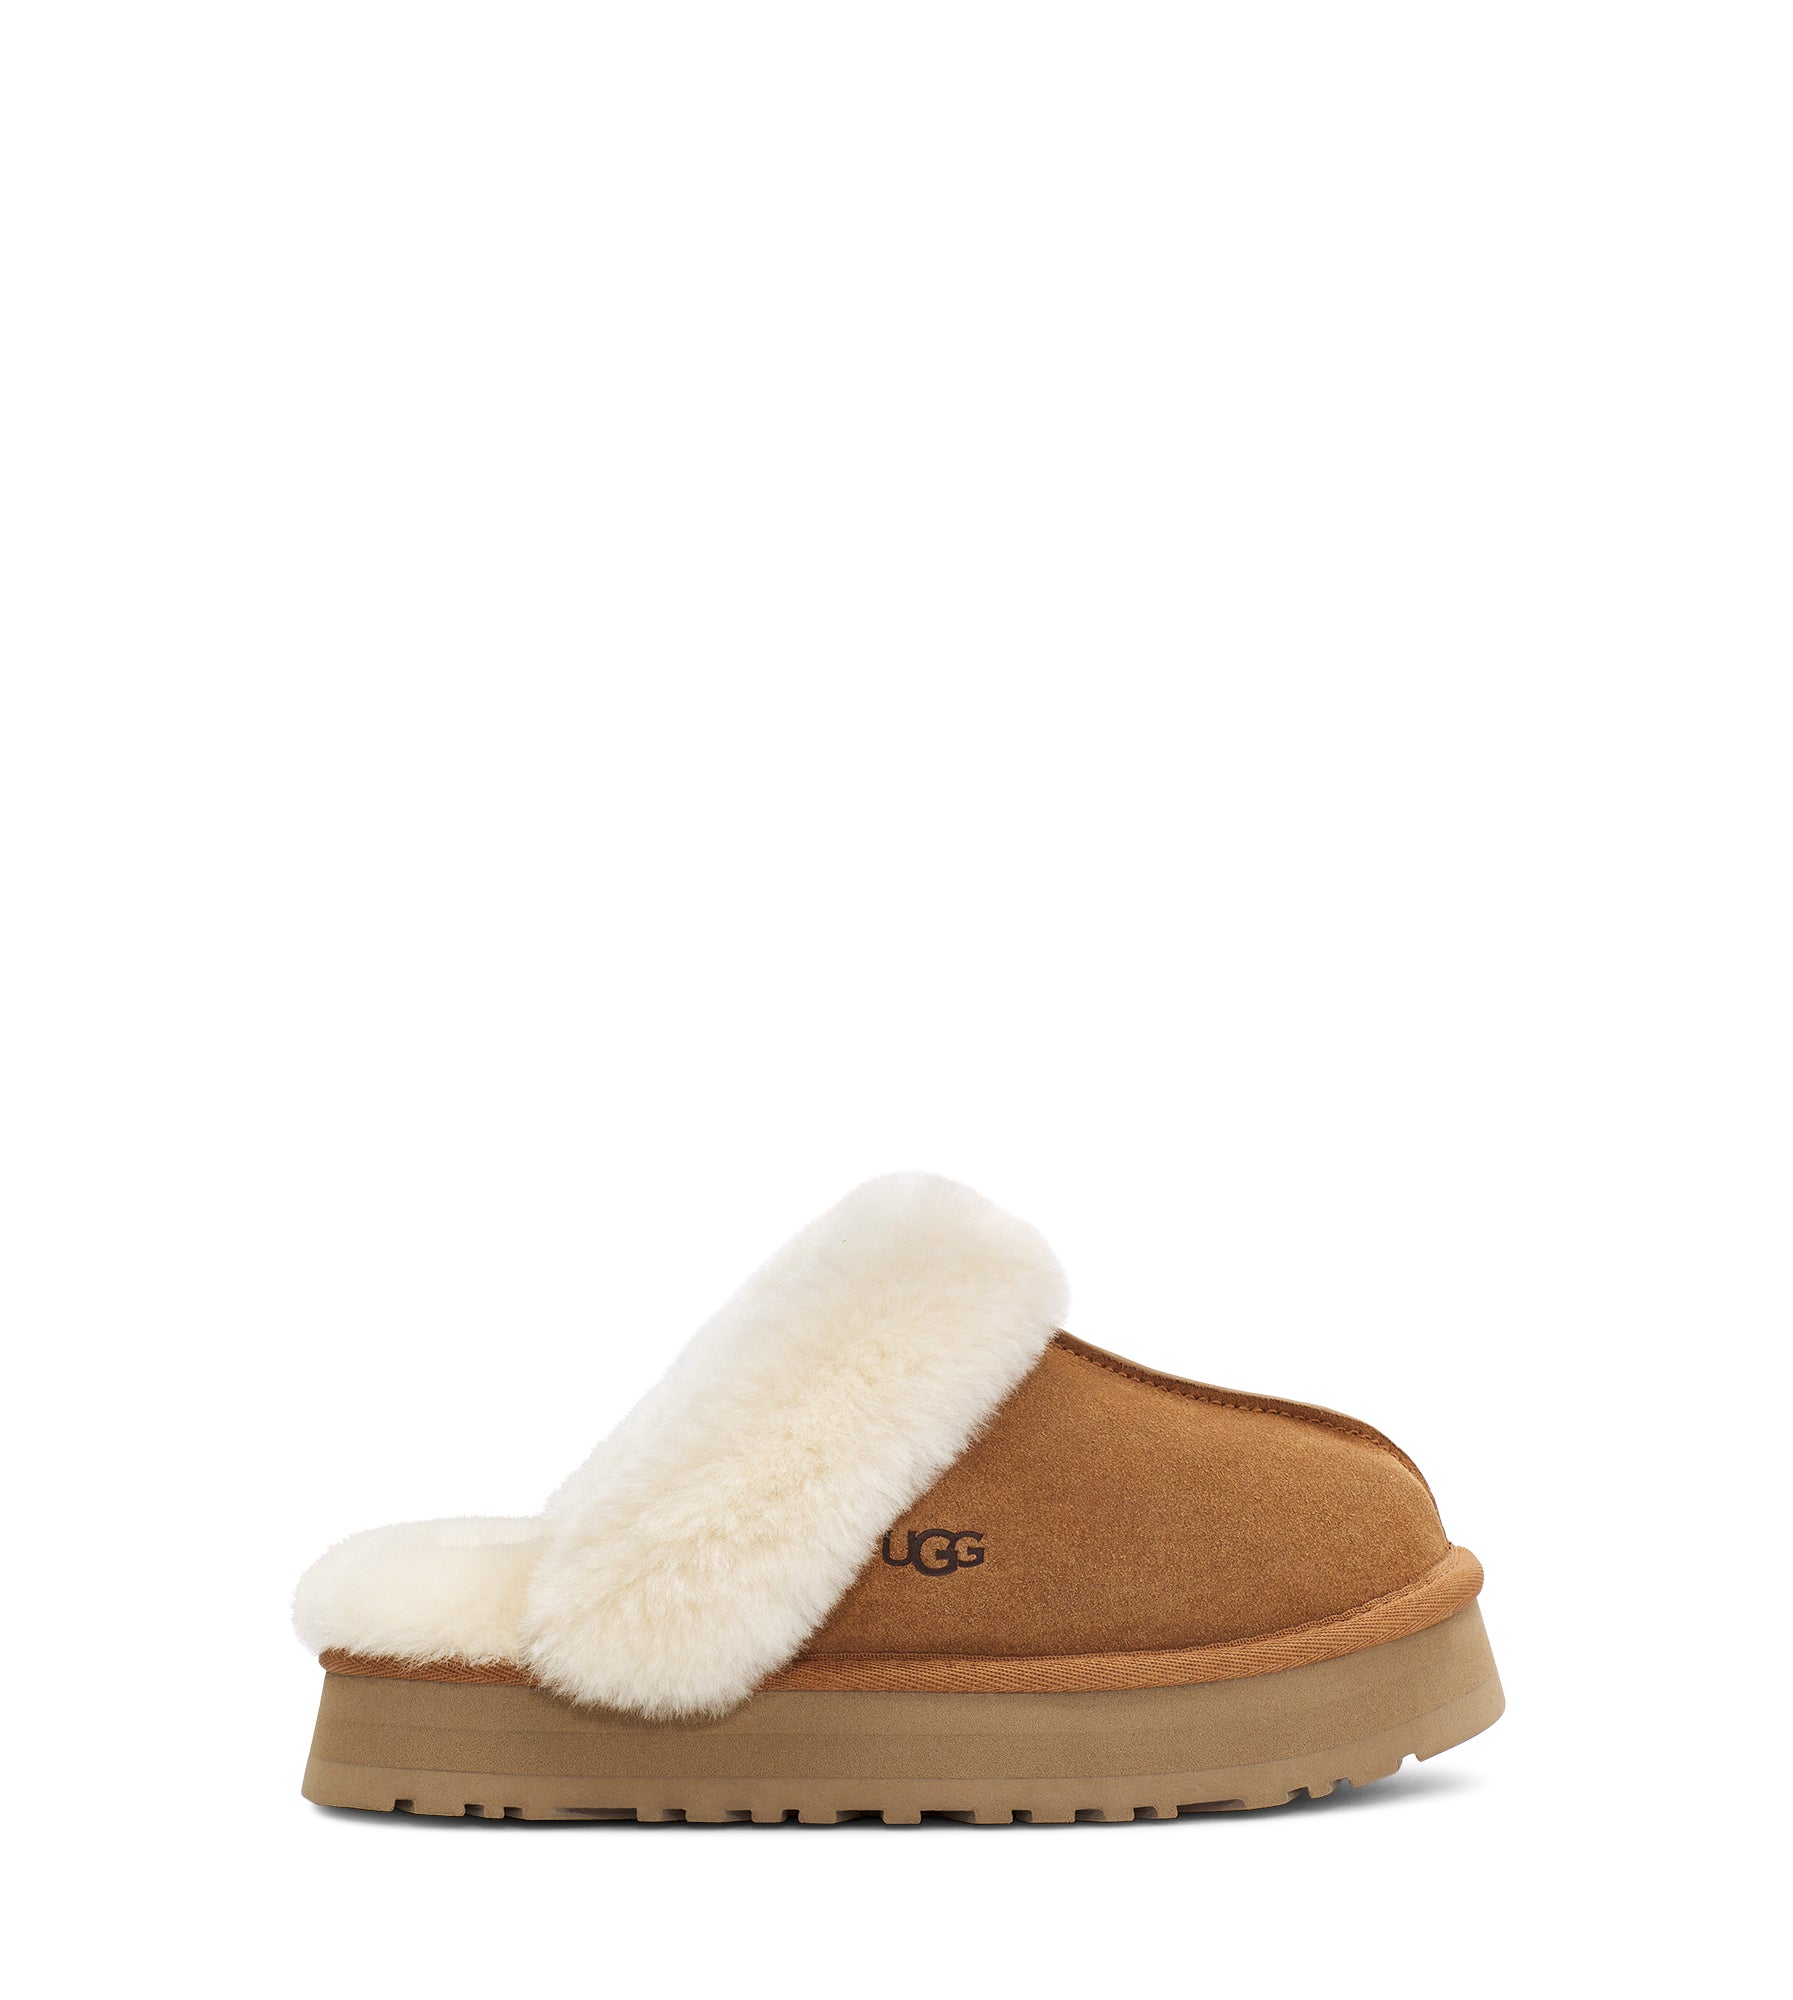 UGG UGG Disquette Slippers Chestnut 3 